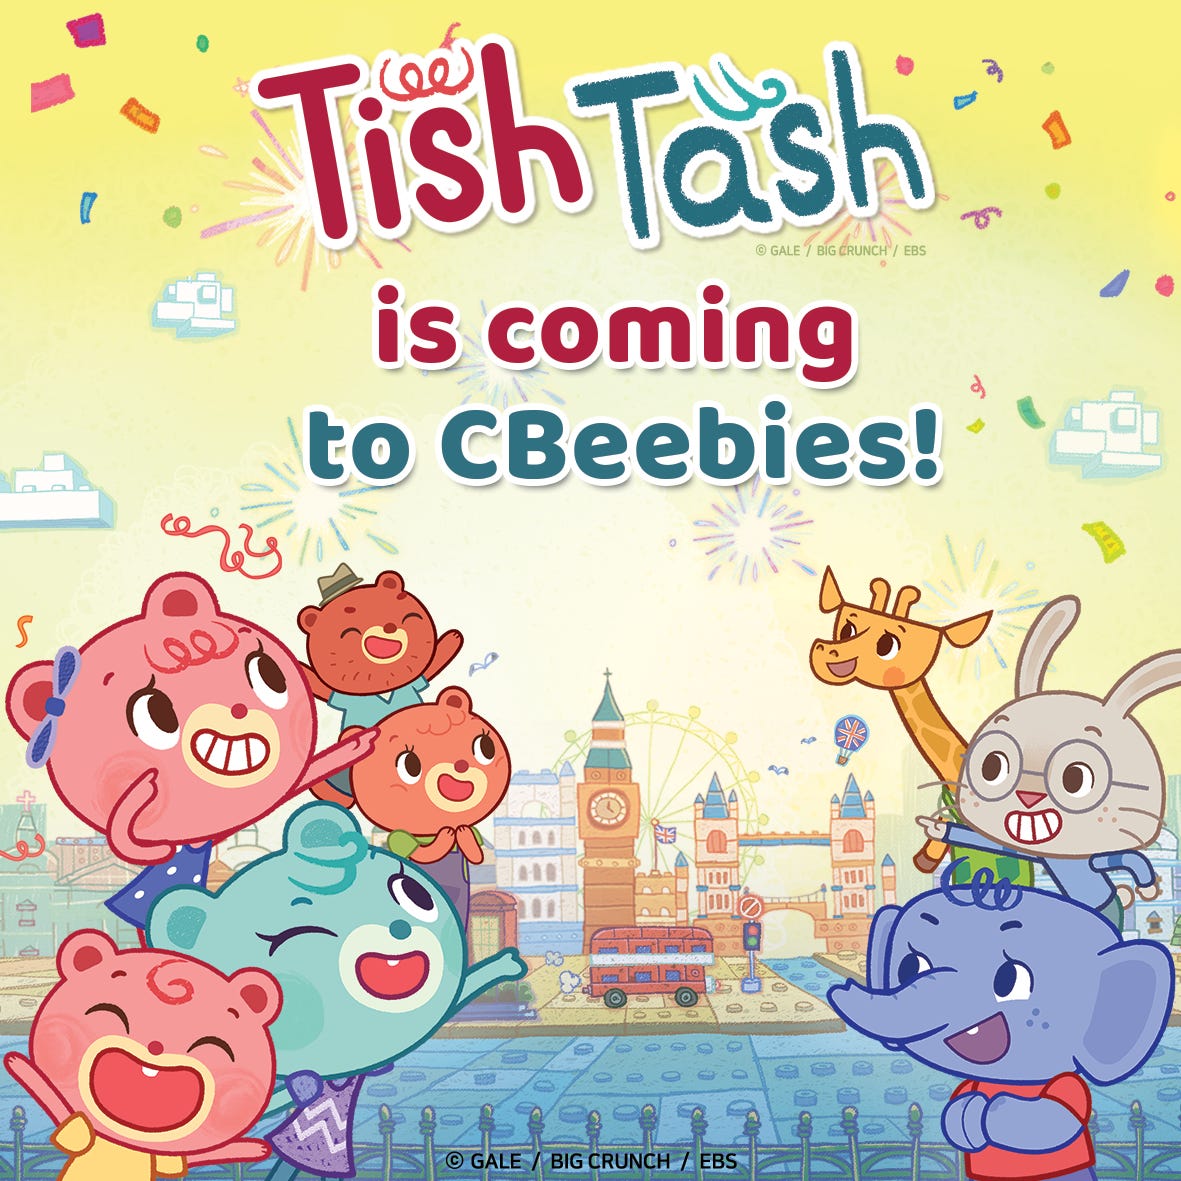 Tish Tash is coming to CBeebies! - We are Karrot!